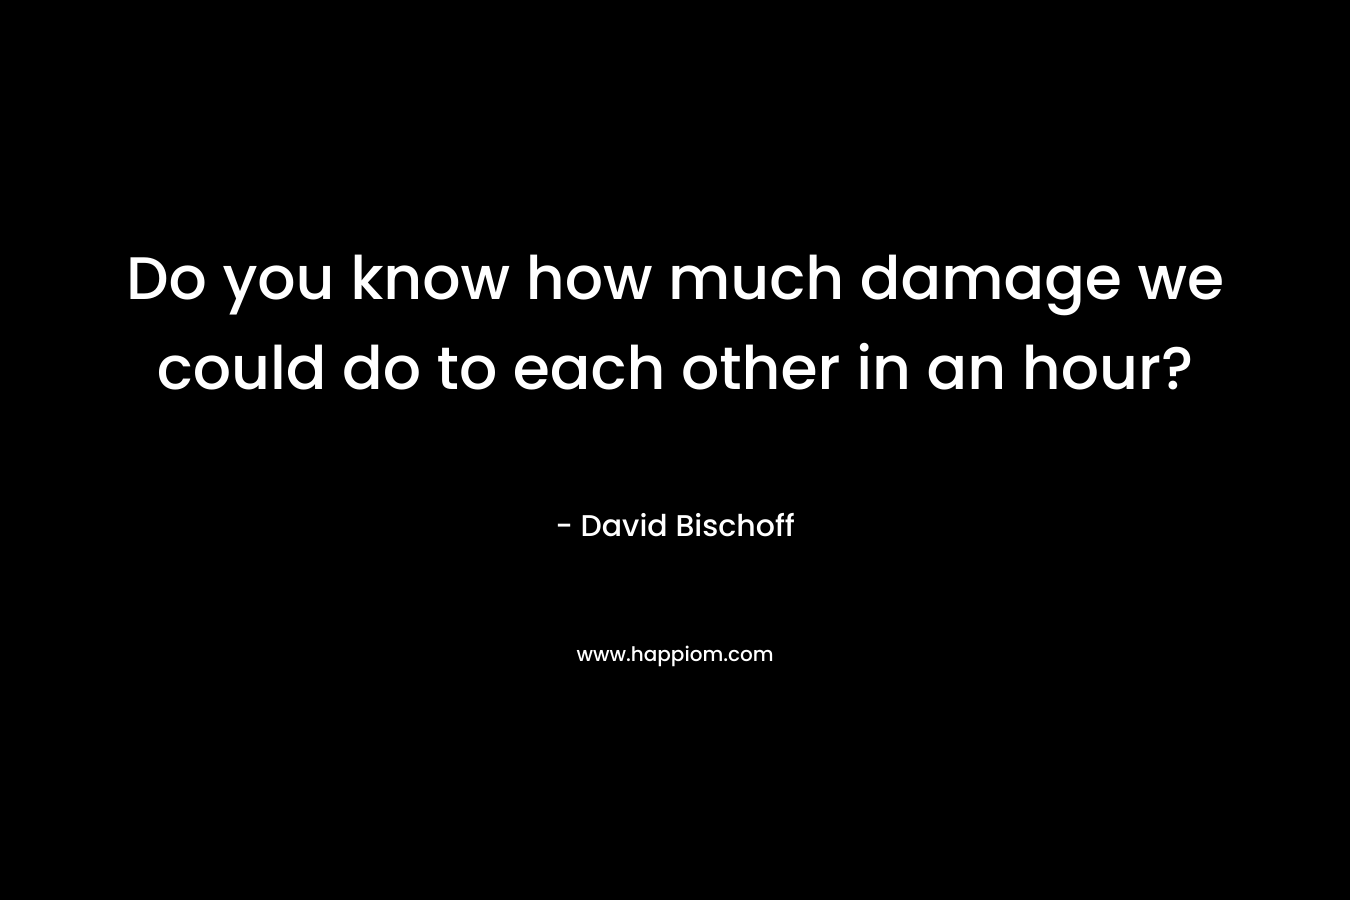 Do you know how much damage we could do to each other in an hour? – David Bischoff